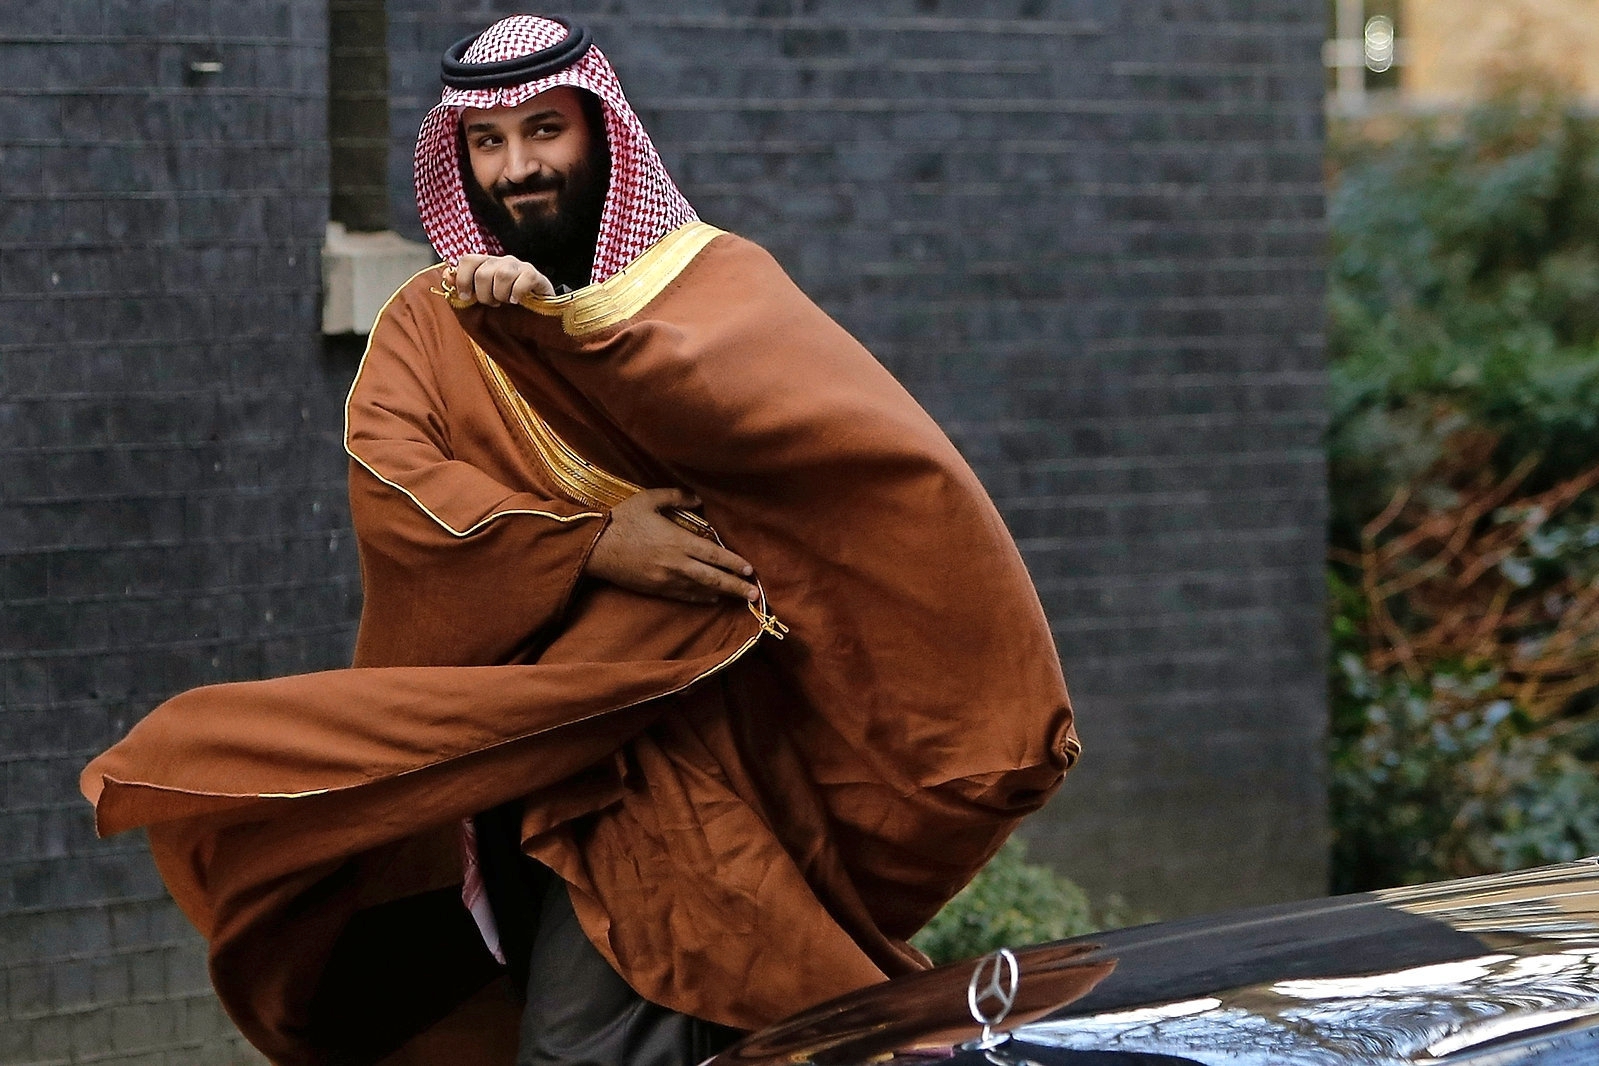 FILE - In this March 7, 2018, file photo, Saudi Arabian Crown Prince Mohammed bin Salman arrives to meet Prime Minister Theresa May outside 10 Downing Street in London. In 2017, at the age of 31, Mohammed became the kingdom‚Äôs crown prince, next in line to the throne now held by his octogenarian father, King Salman. (AP Photo/Alastair Grant, File)
ArcInfo